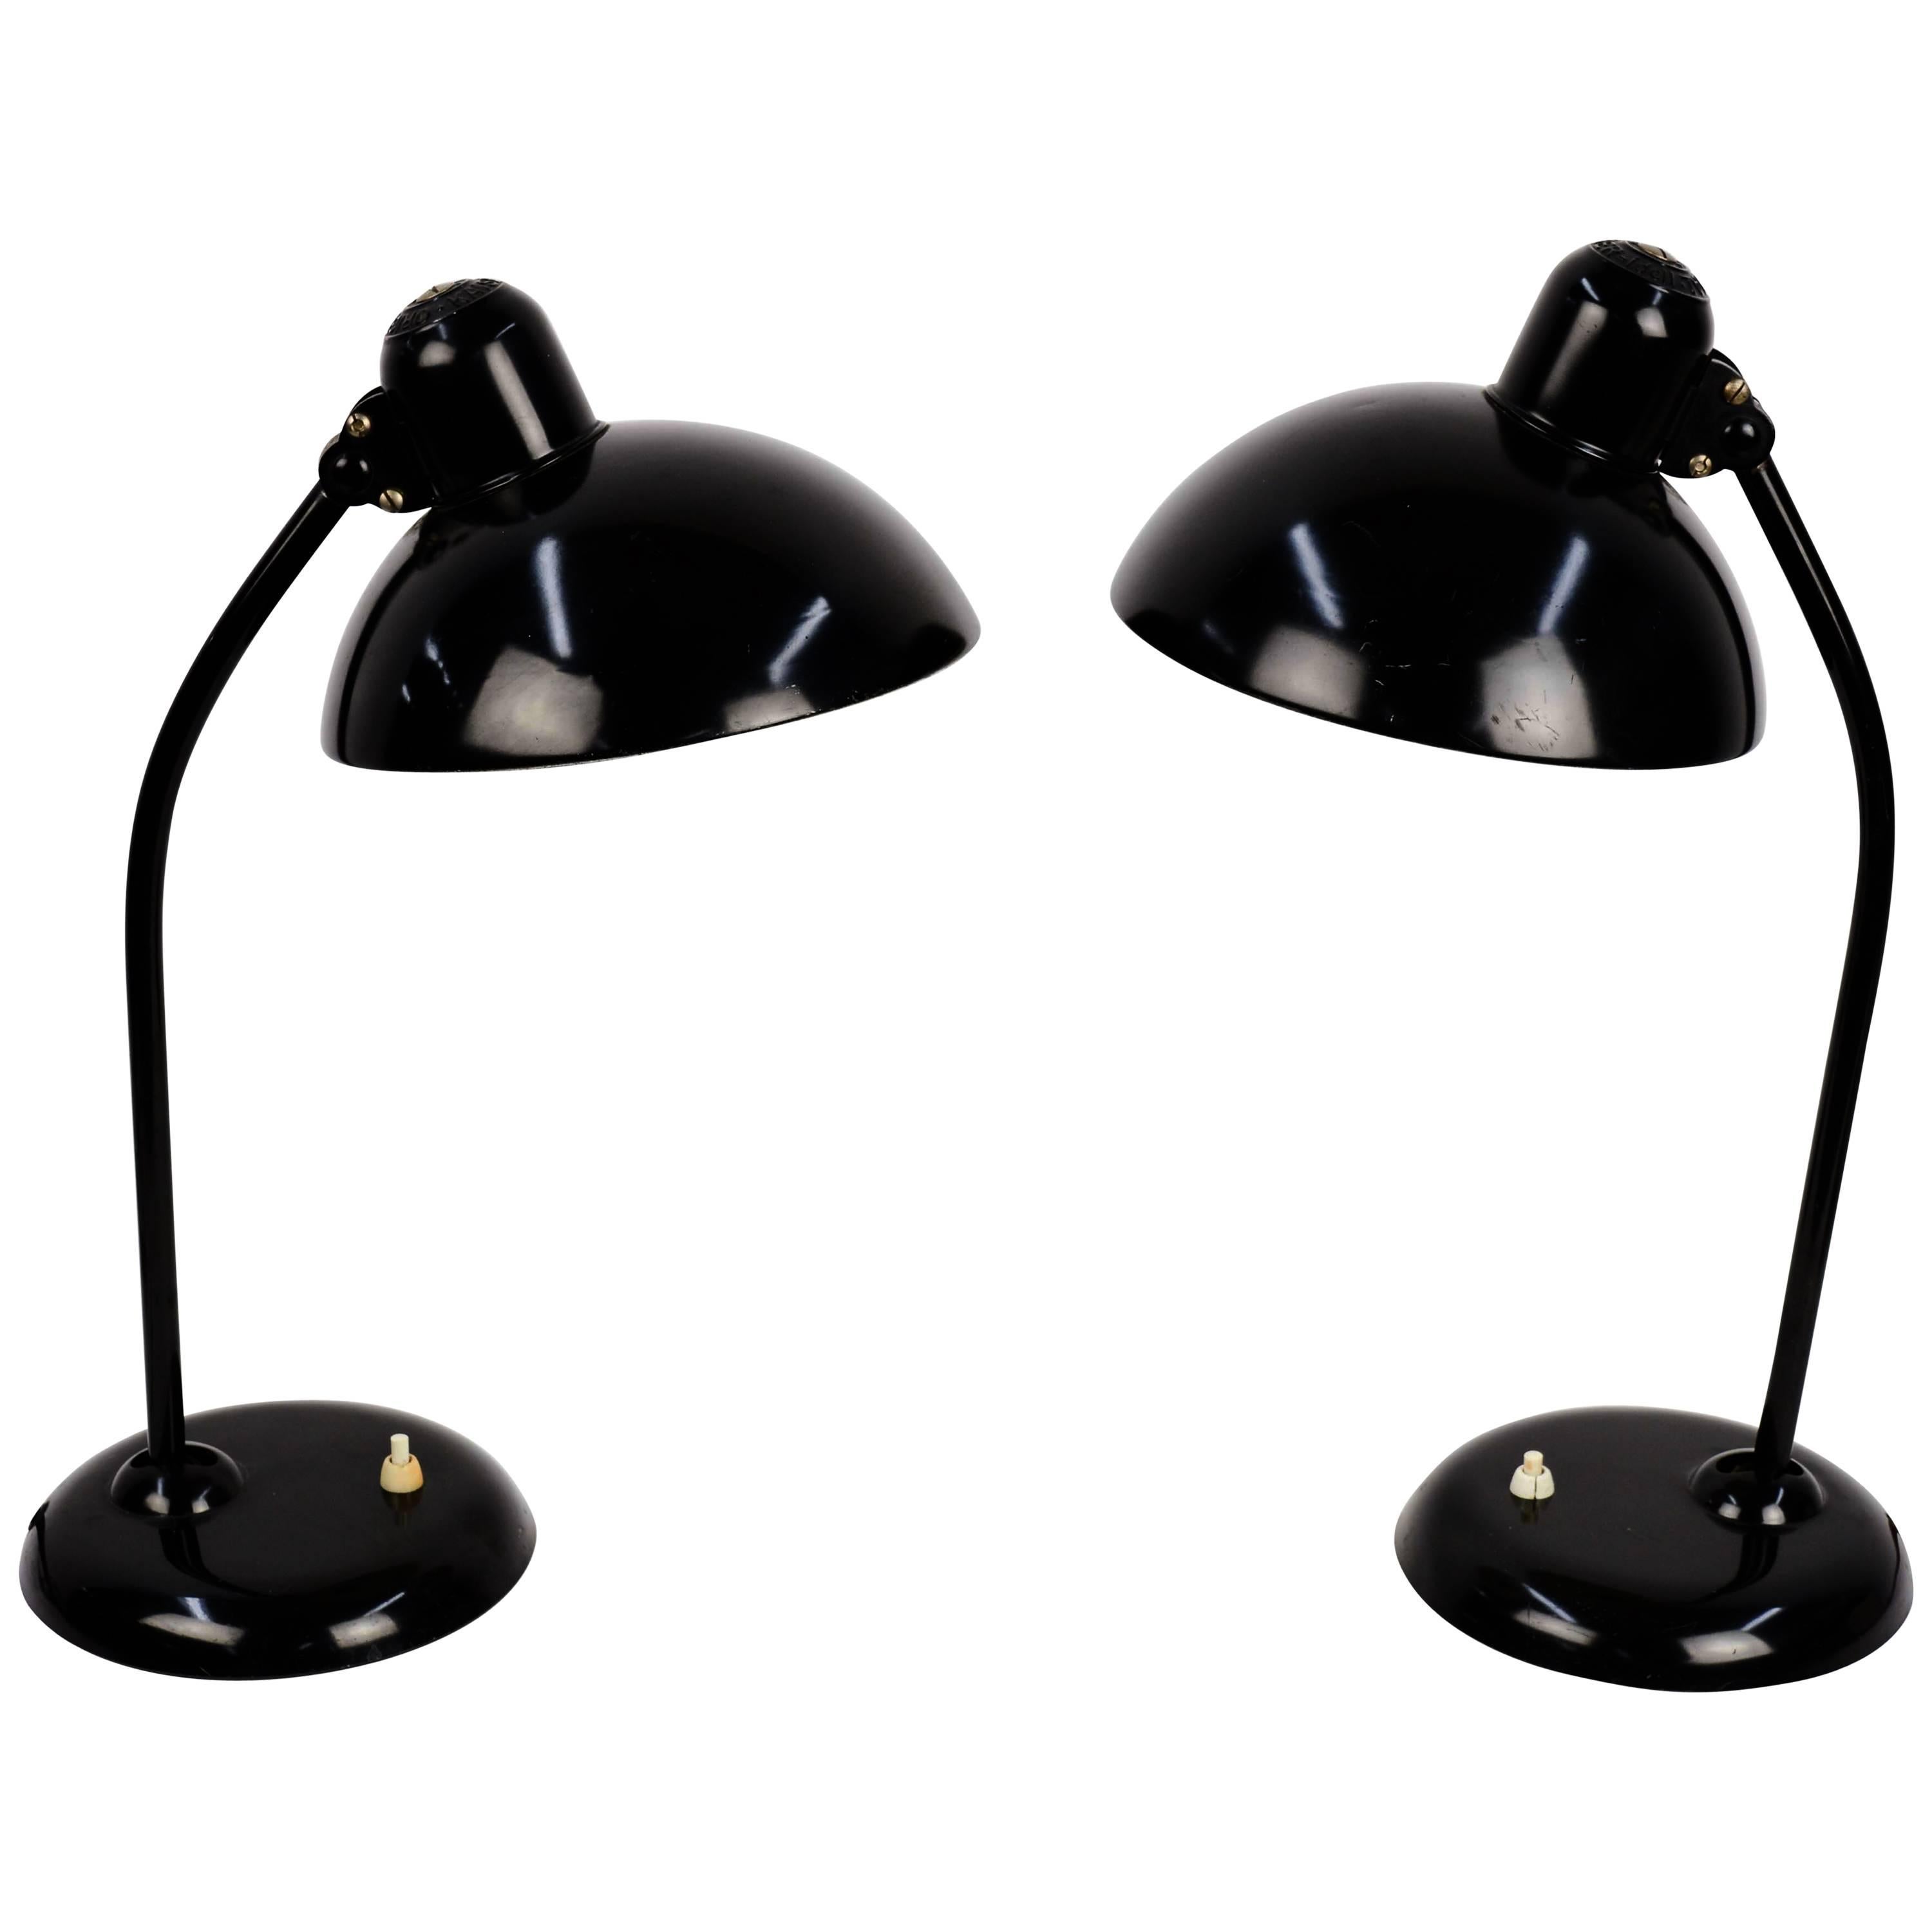 Pair of Christian Dell for Kaiser "Ideal 6556" Table Lamp, circa 1930